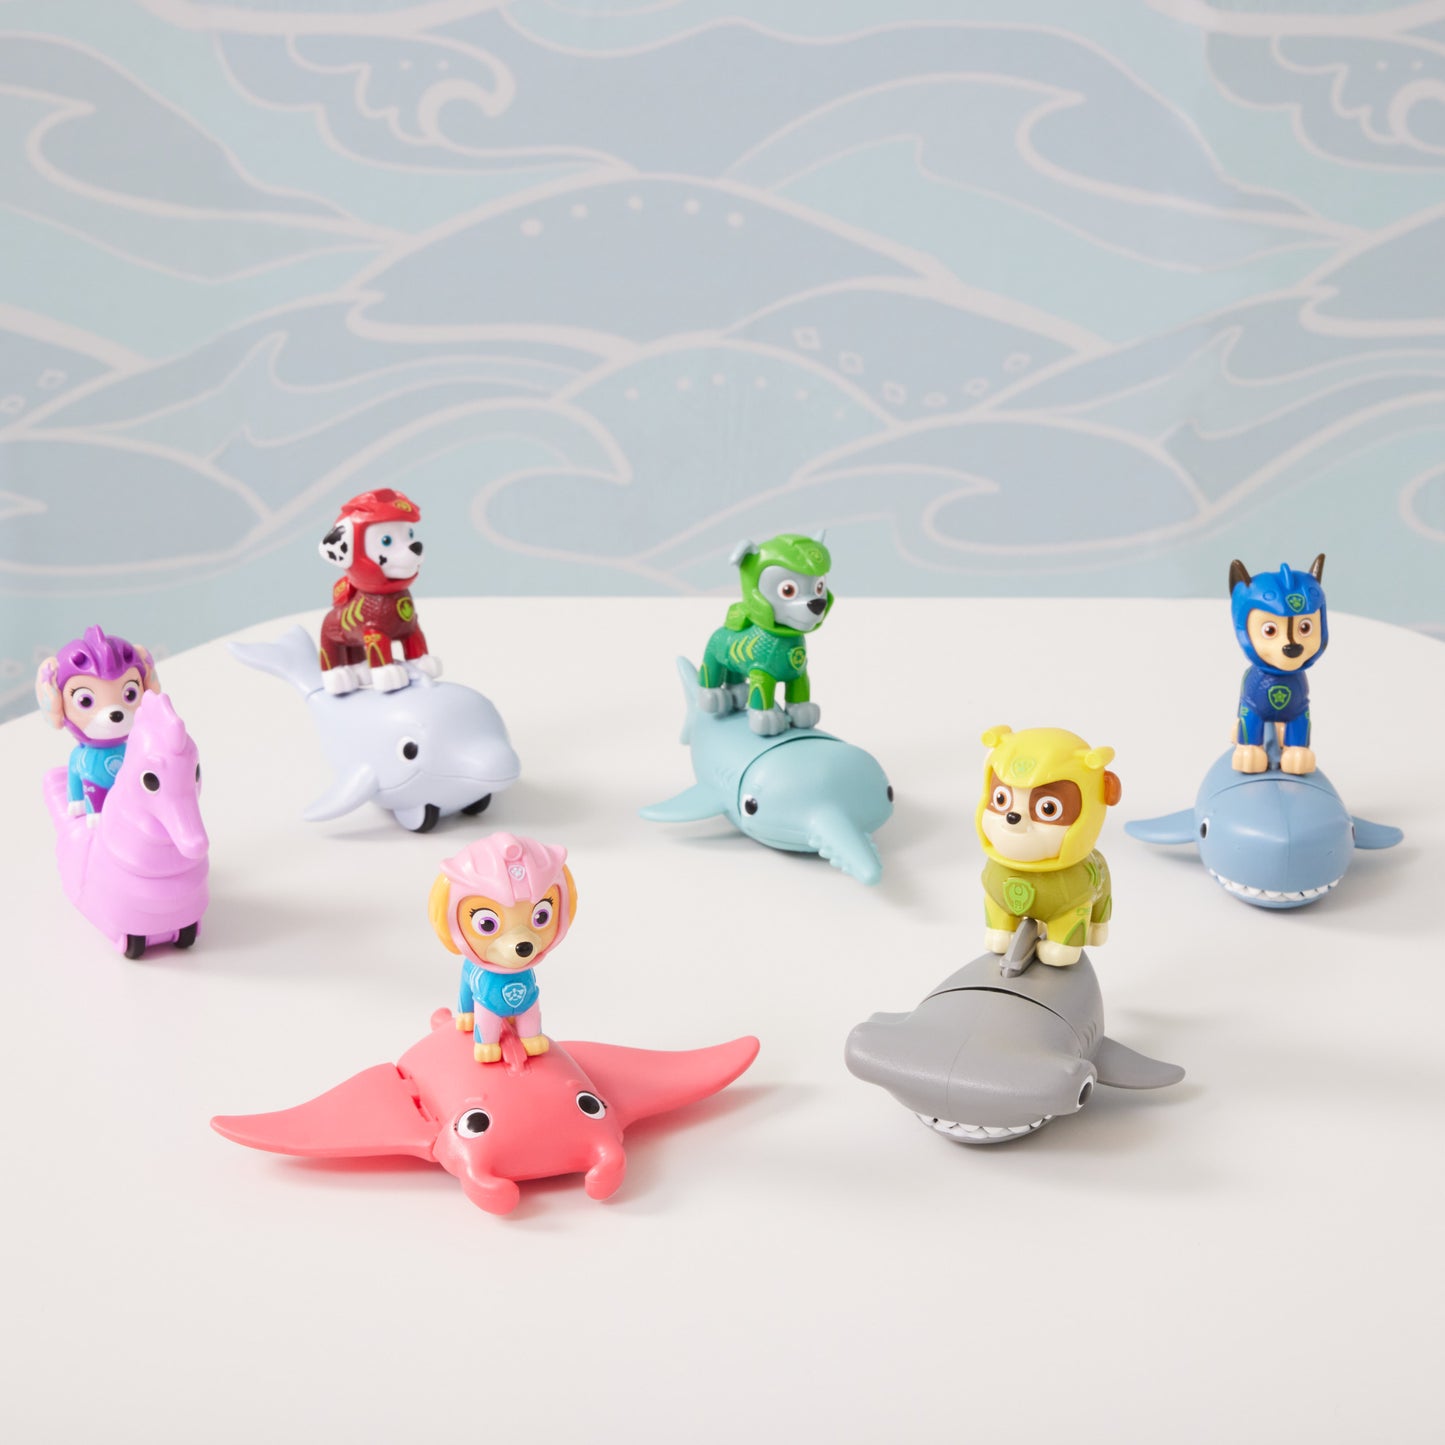 PAW Patrol, Aqua Pups Chase and Shark Action Figures